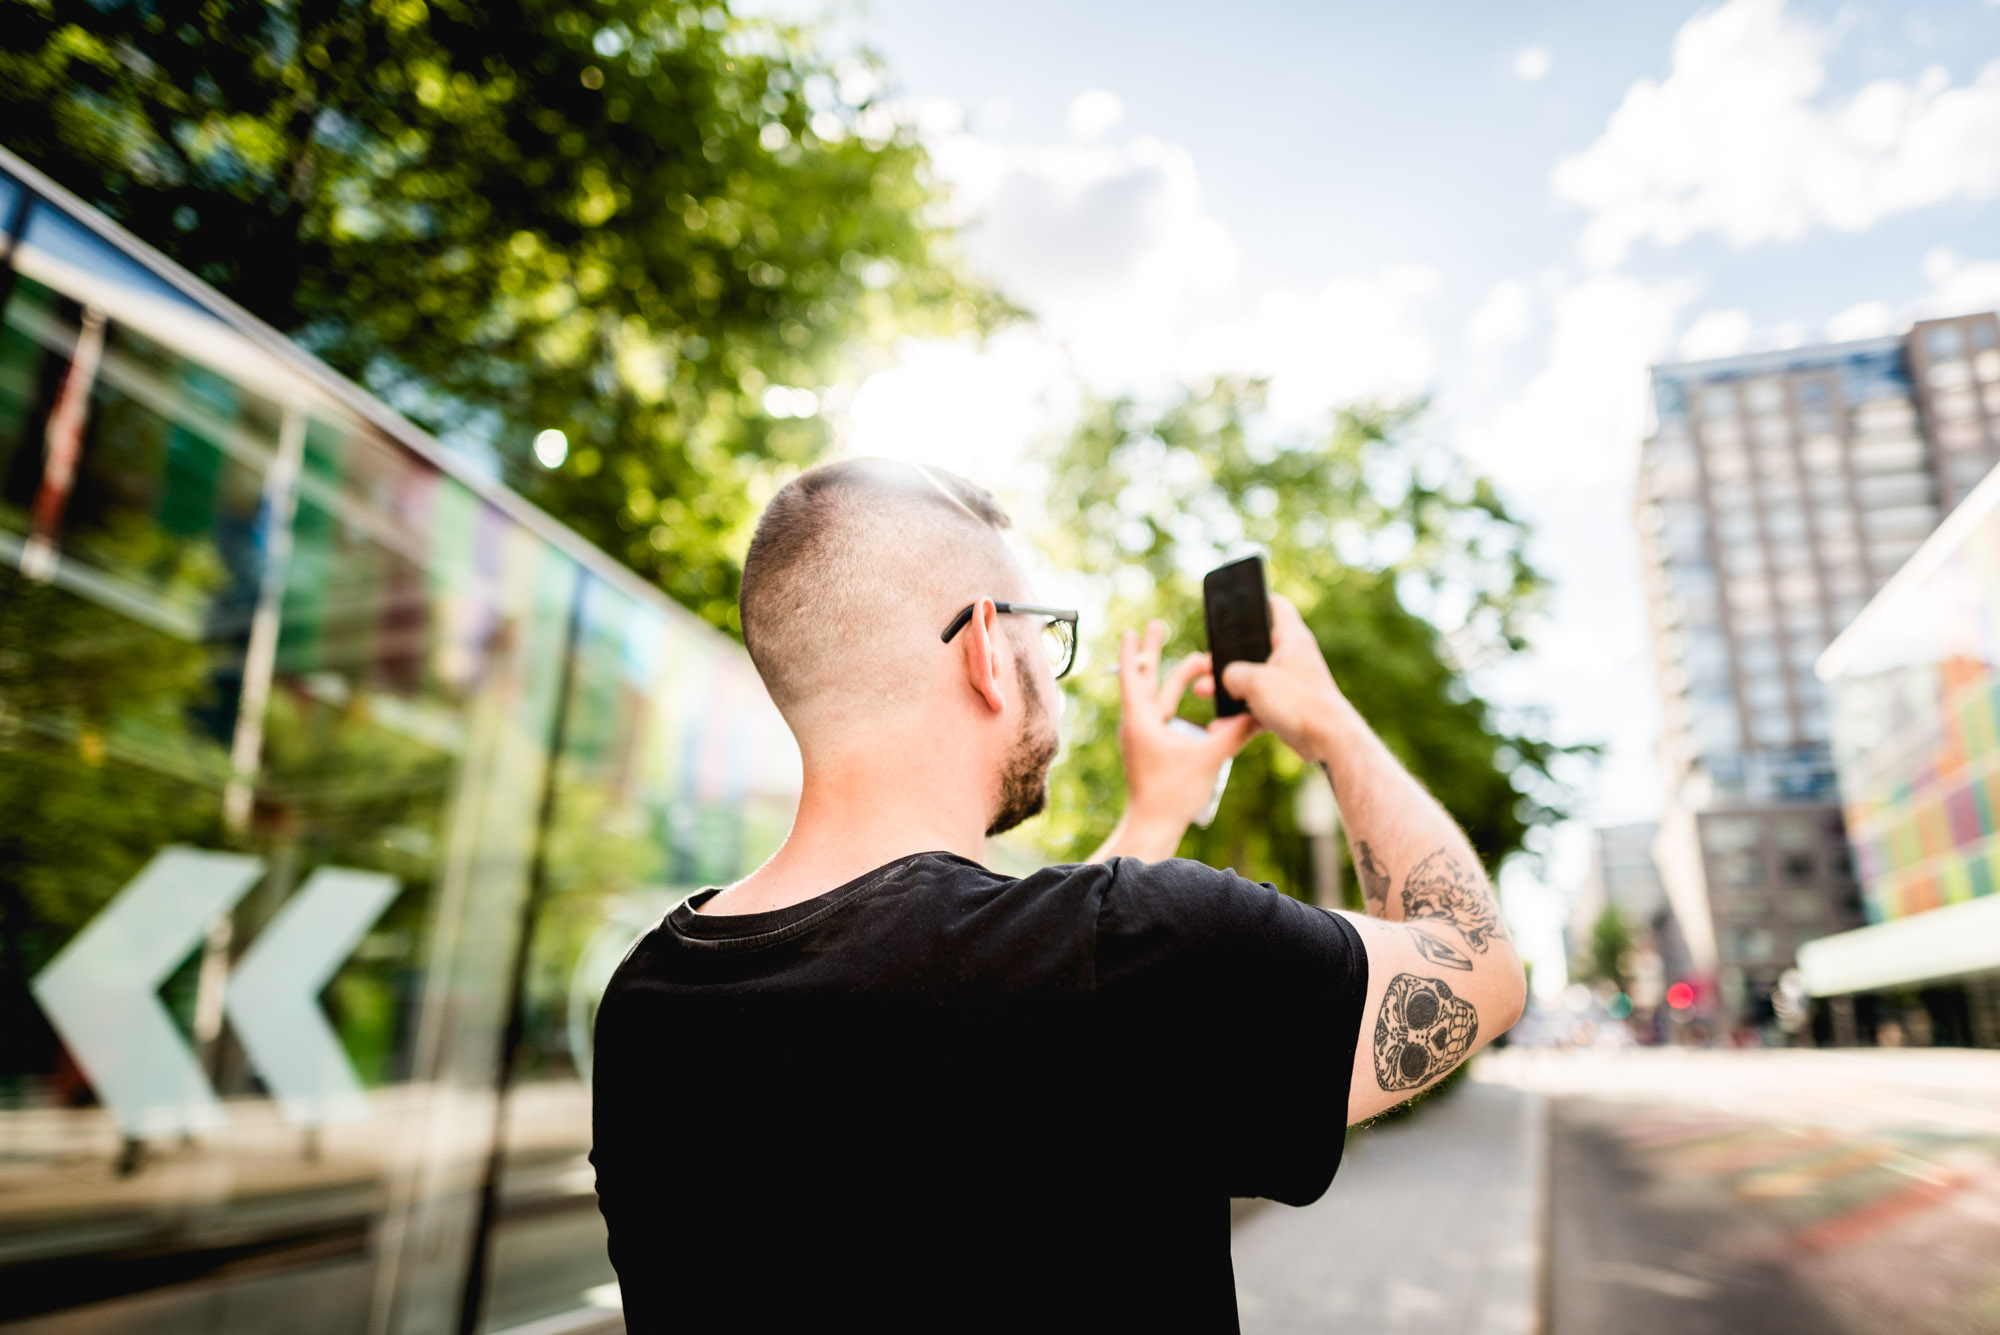 Jeff On The Road - How To Find An Apartment in Montreal - Men using smartphone in Montreal - All photos are under Copyright  © 2017 Jeff Frenette Photography / dezjeff. To use the photos, please contact me at dezjeff@me.com.